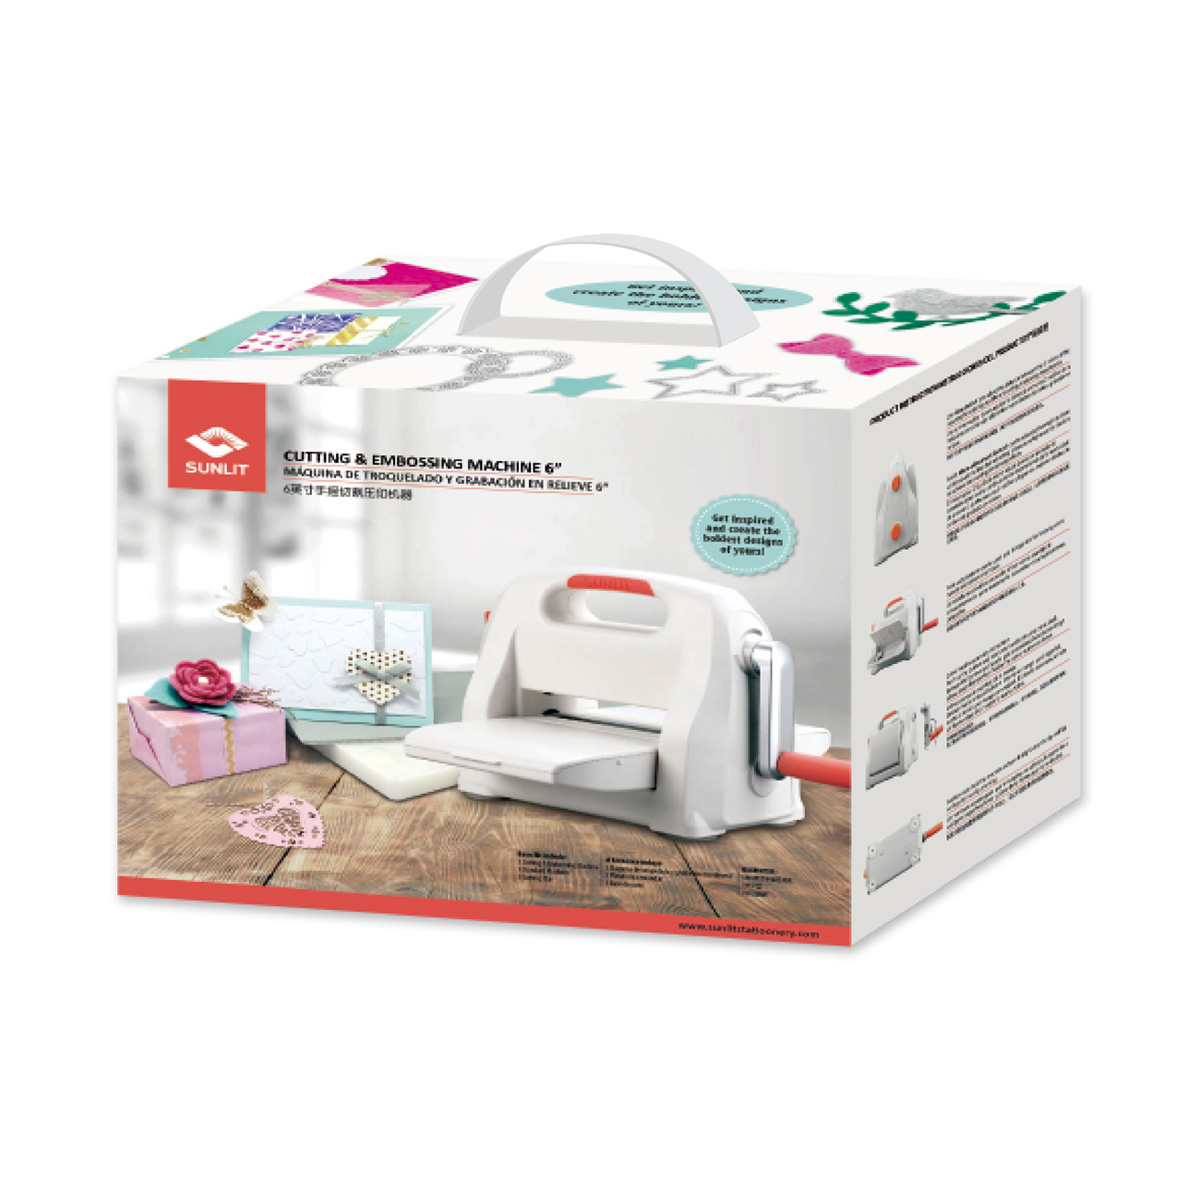 Unboxing and review of the Bira Sunlit 9 inch Cutting and Embossing Machine  With Starter Kit 